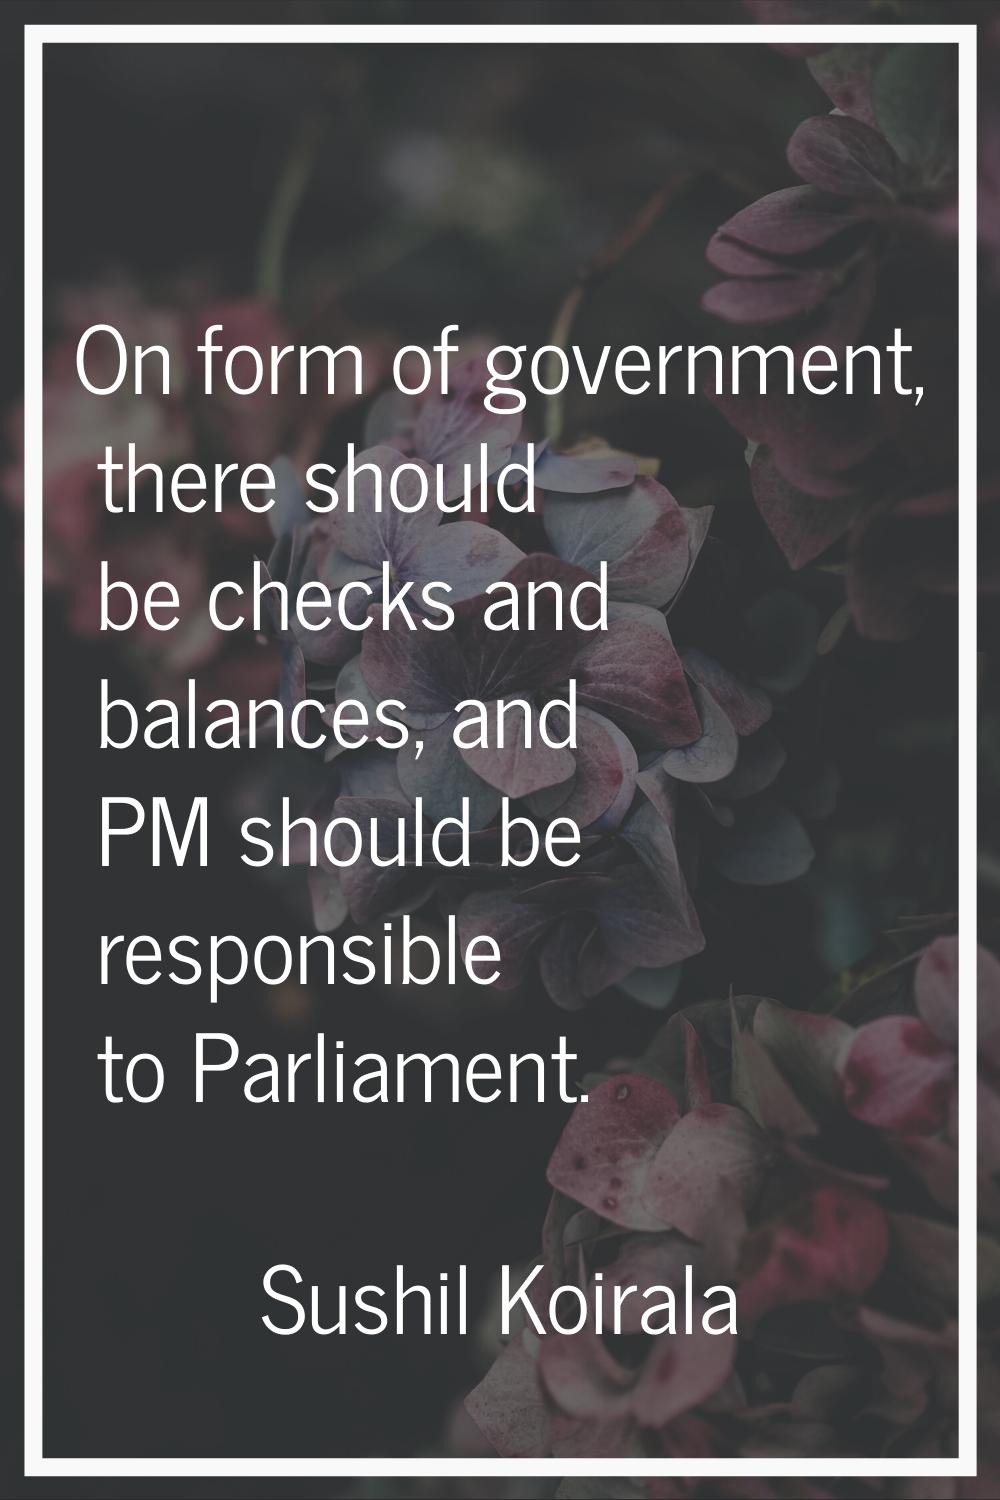 On form of government, there should be checks and balances, and PM should be responsible to Parliam